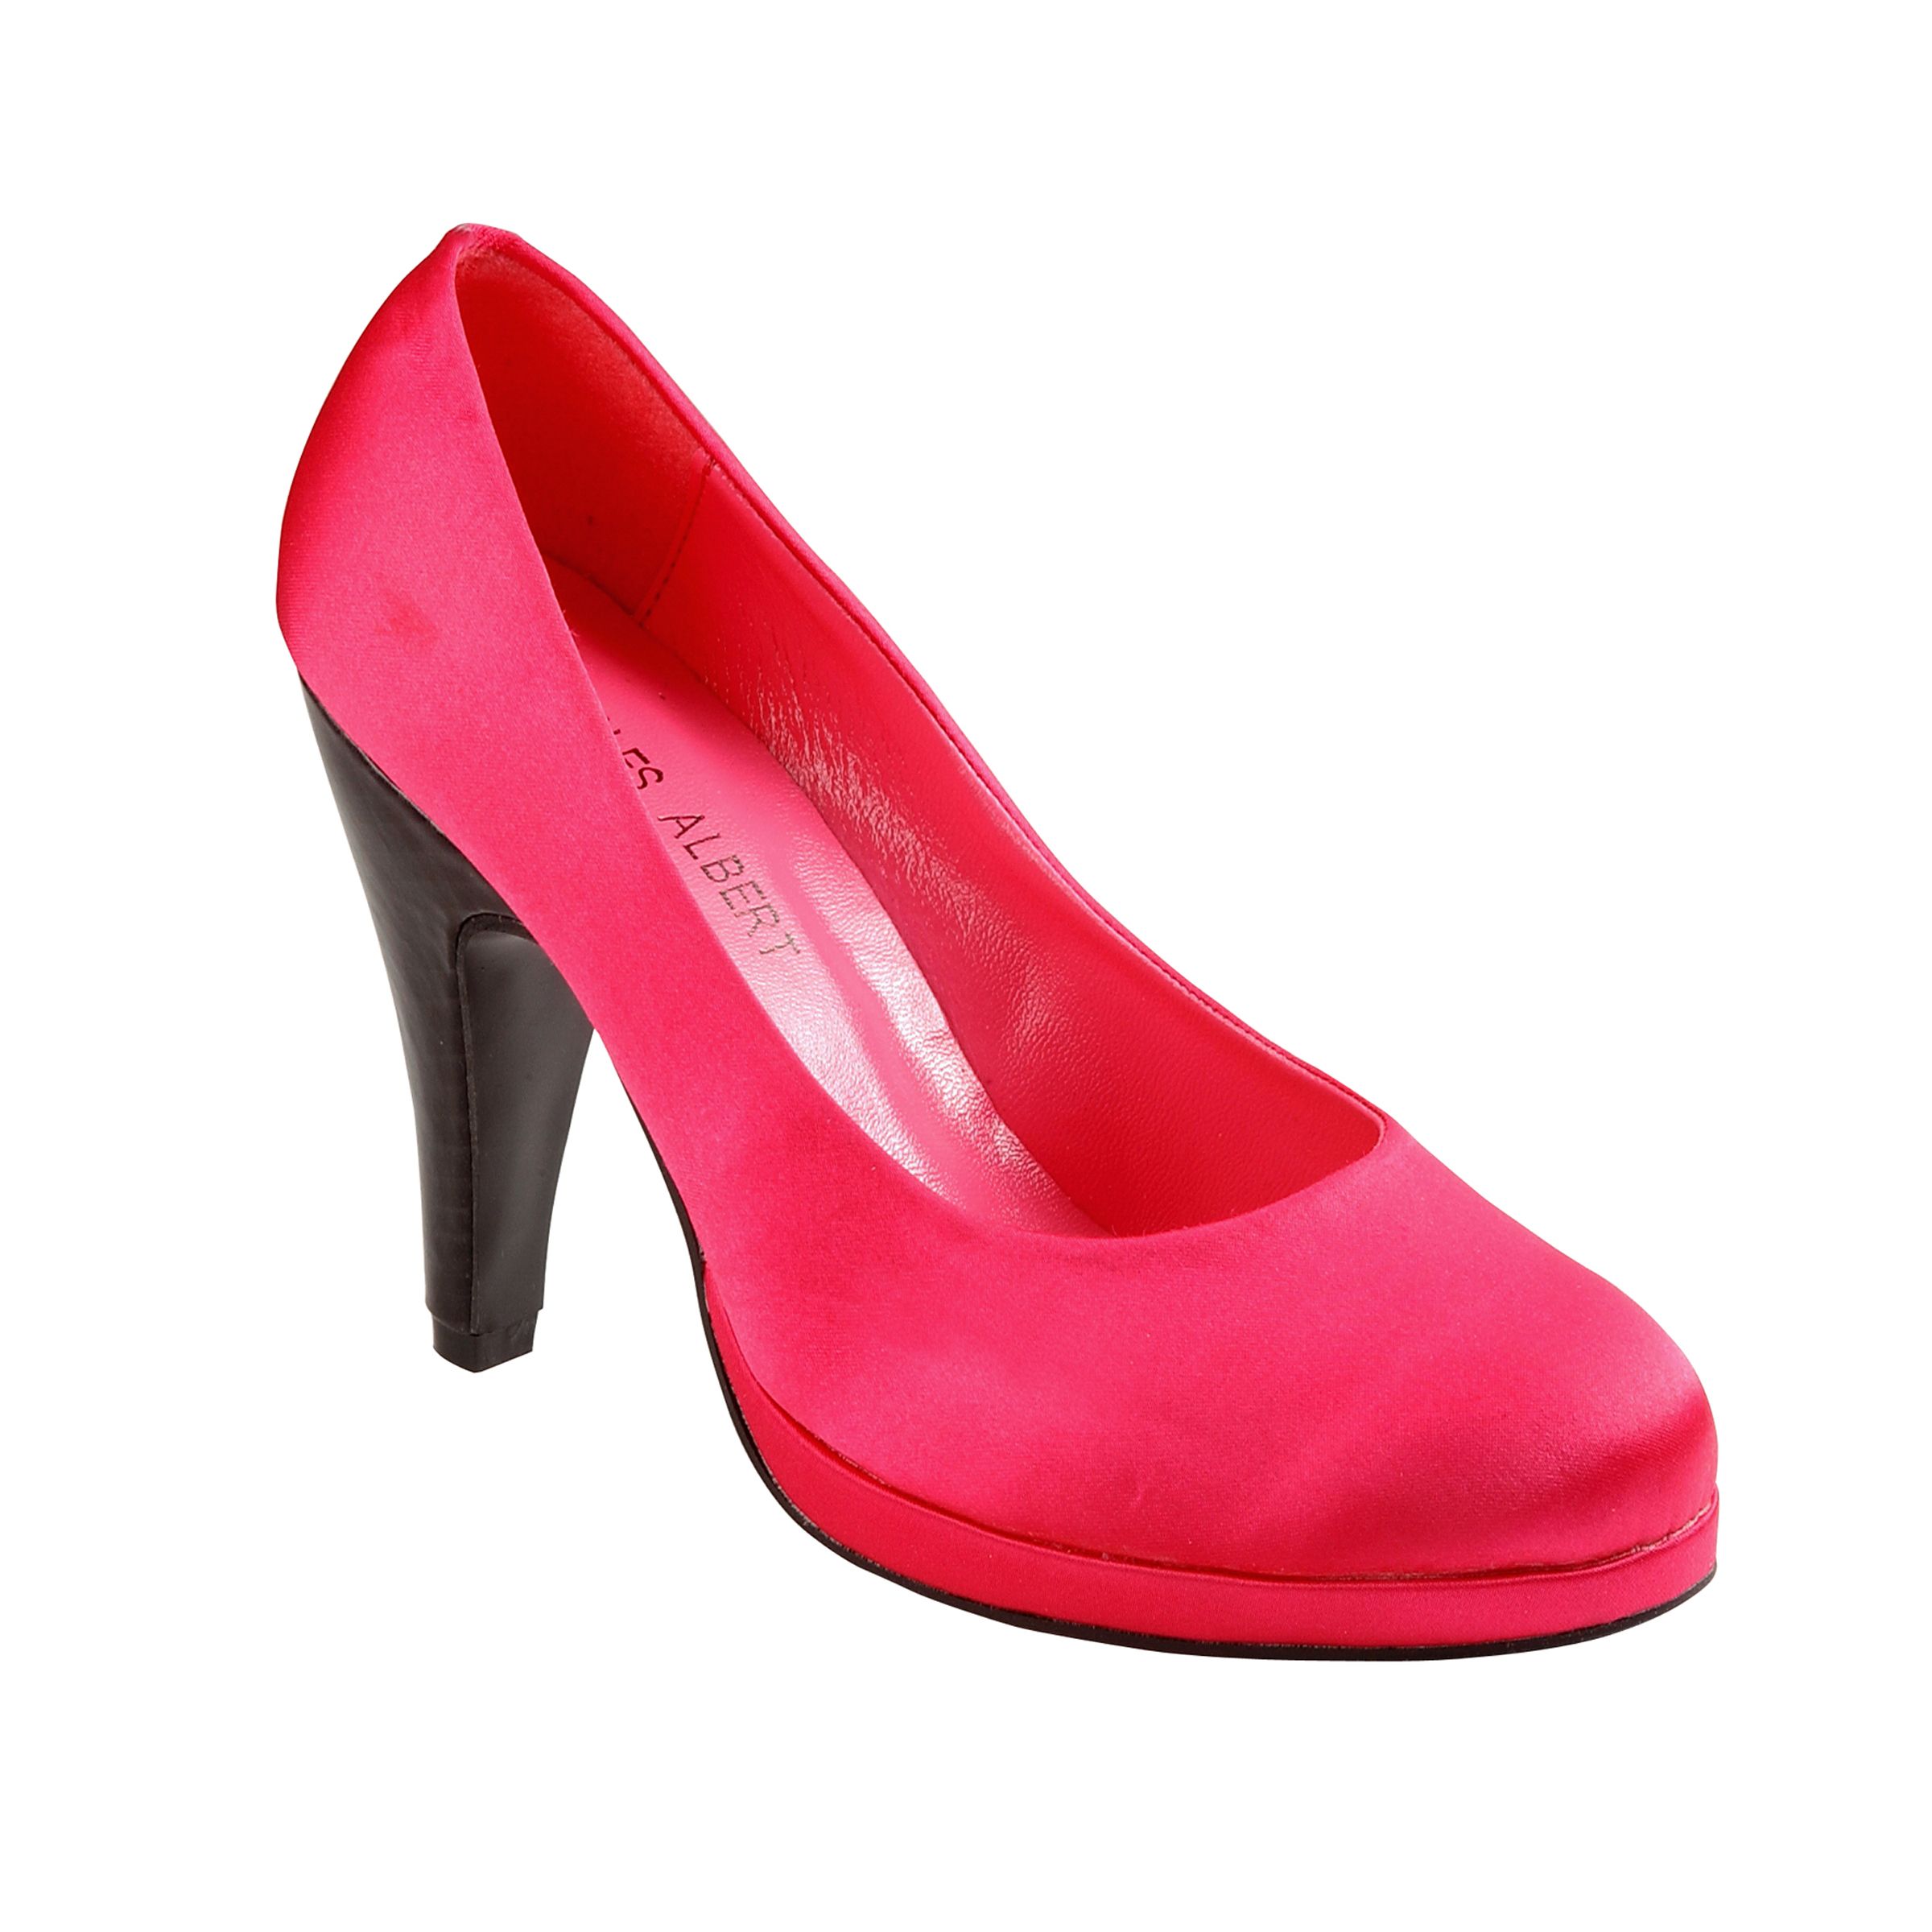 Charles Albert Shoes Candy Apple